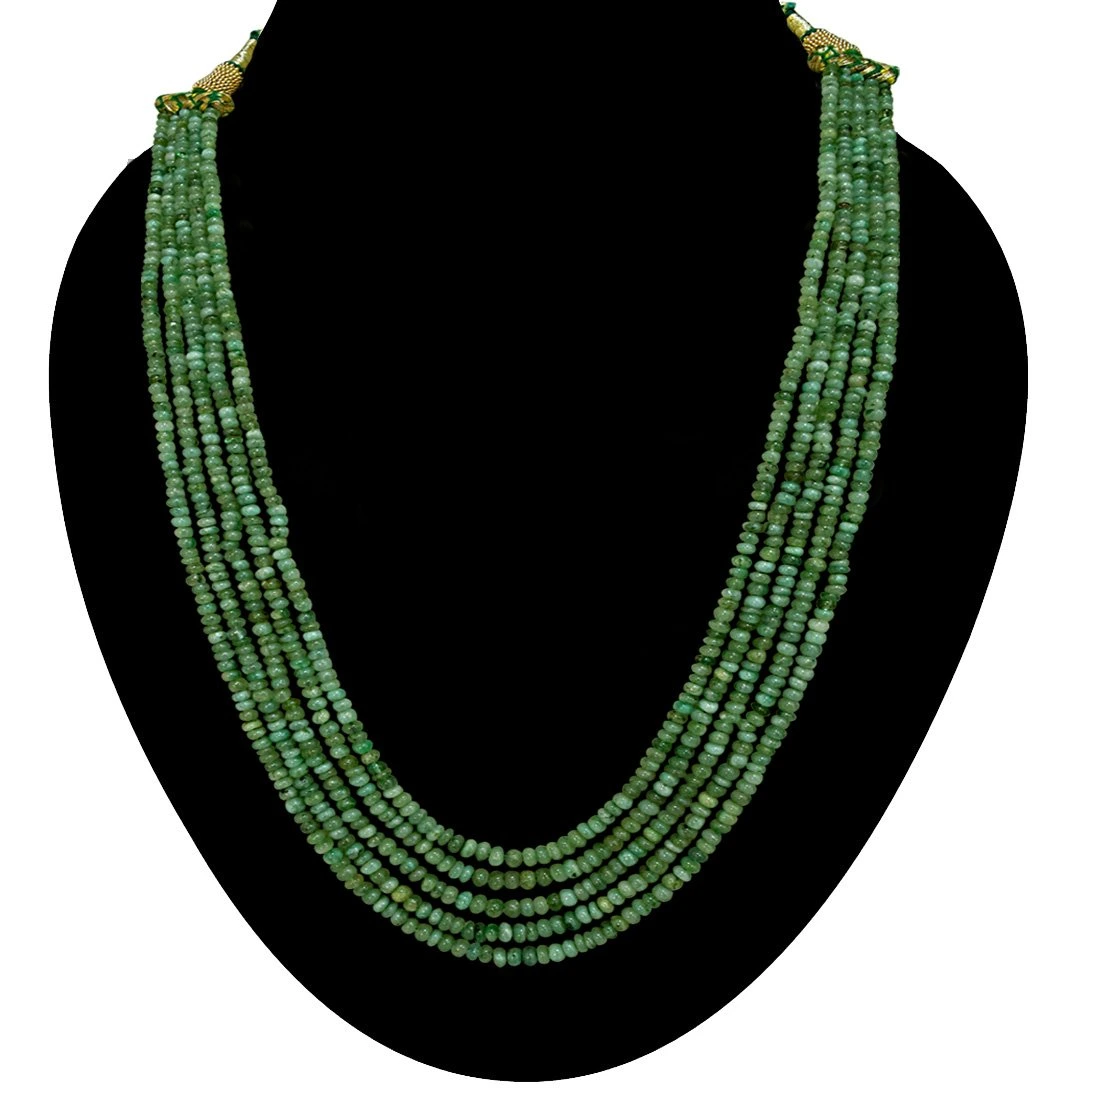 5 Line 263cts REAL Natural Green Emerald Beads Necklace for Women (263cts EMR Neck)